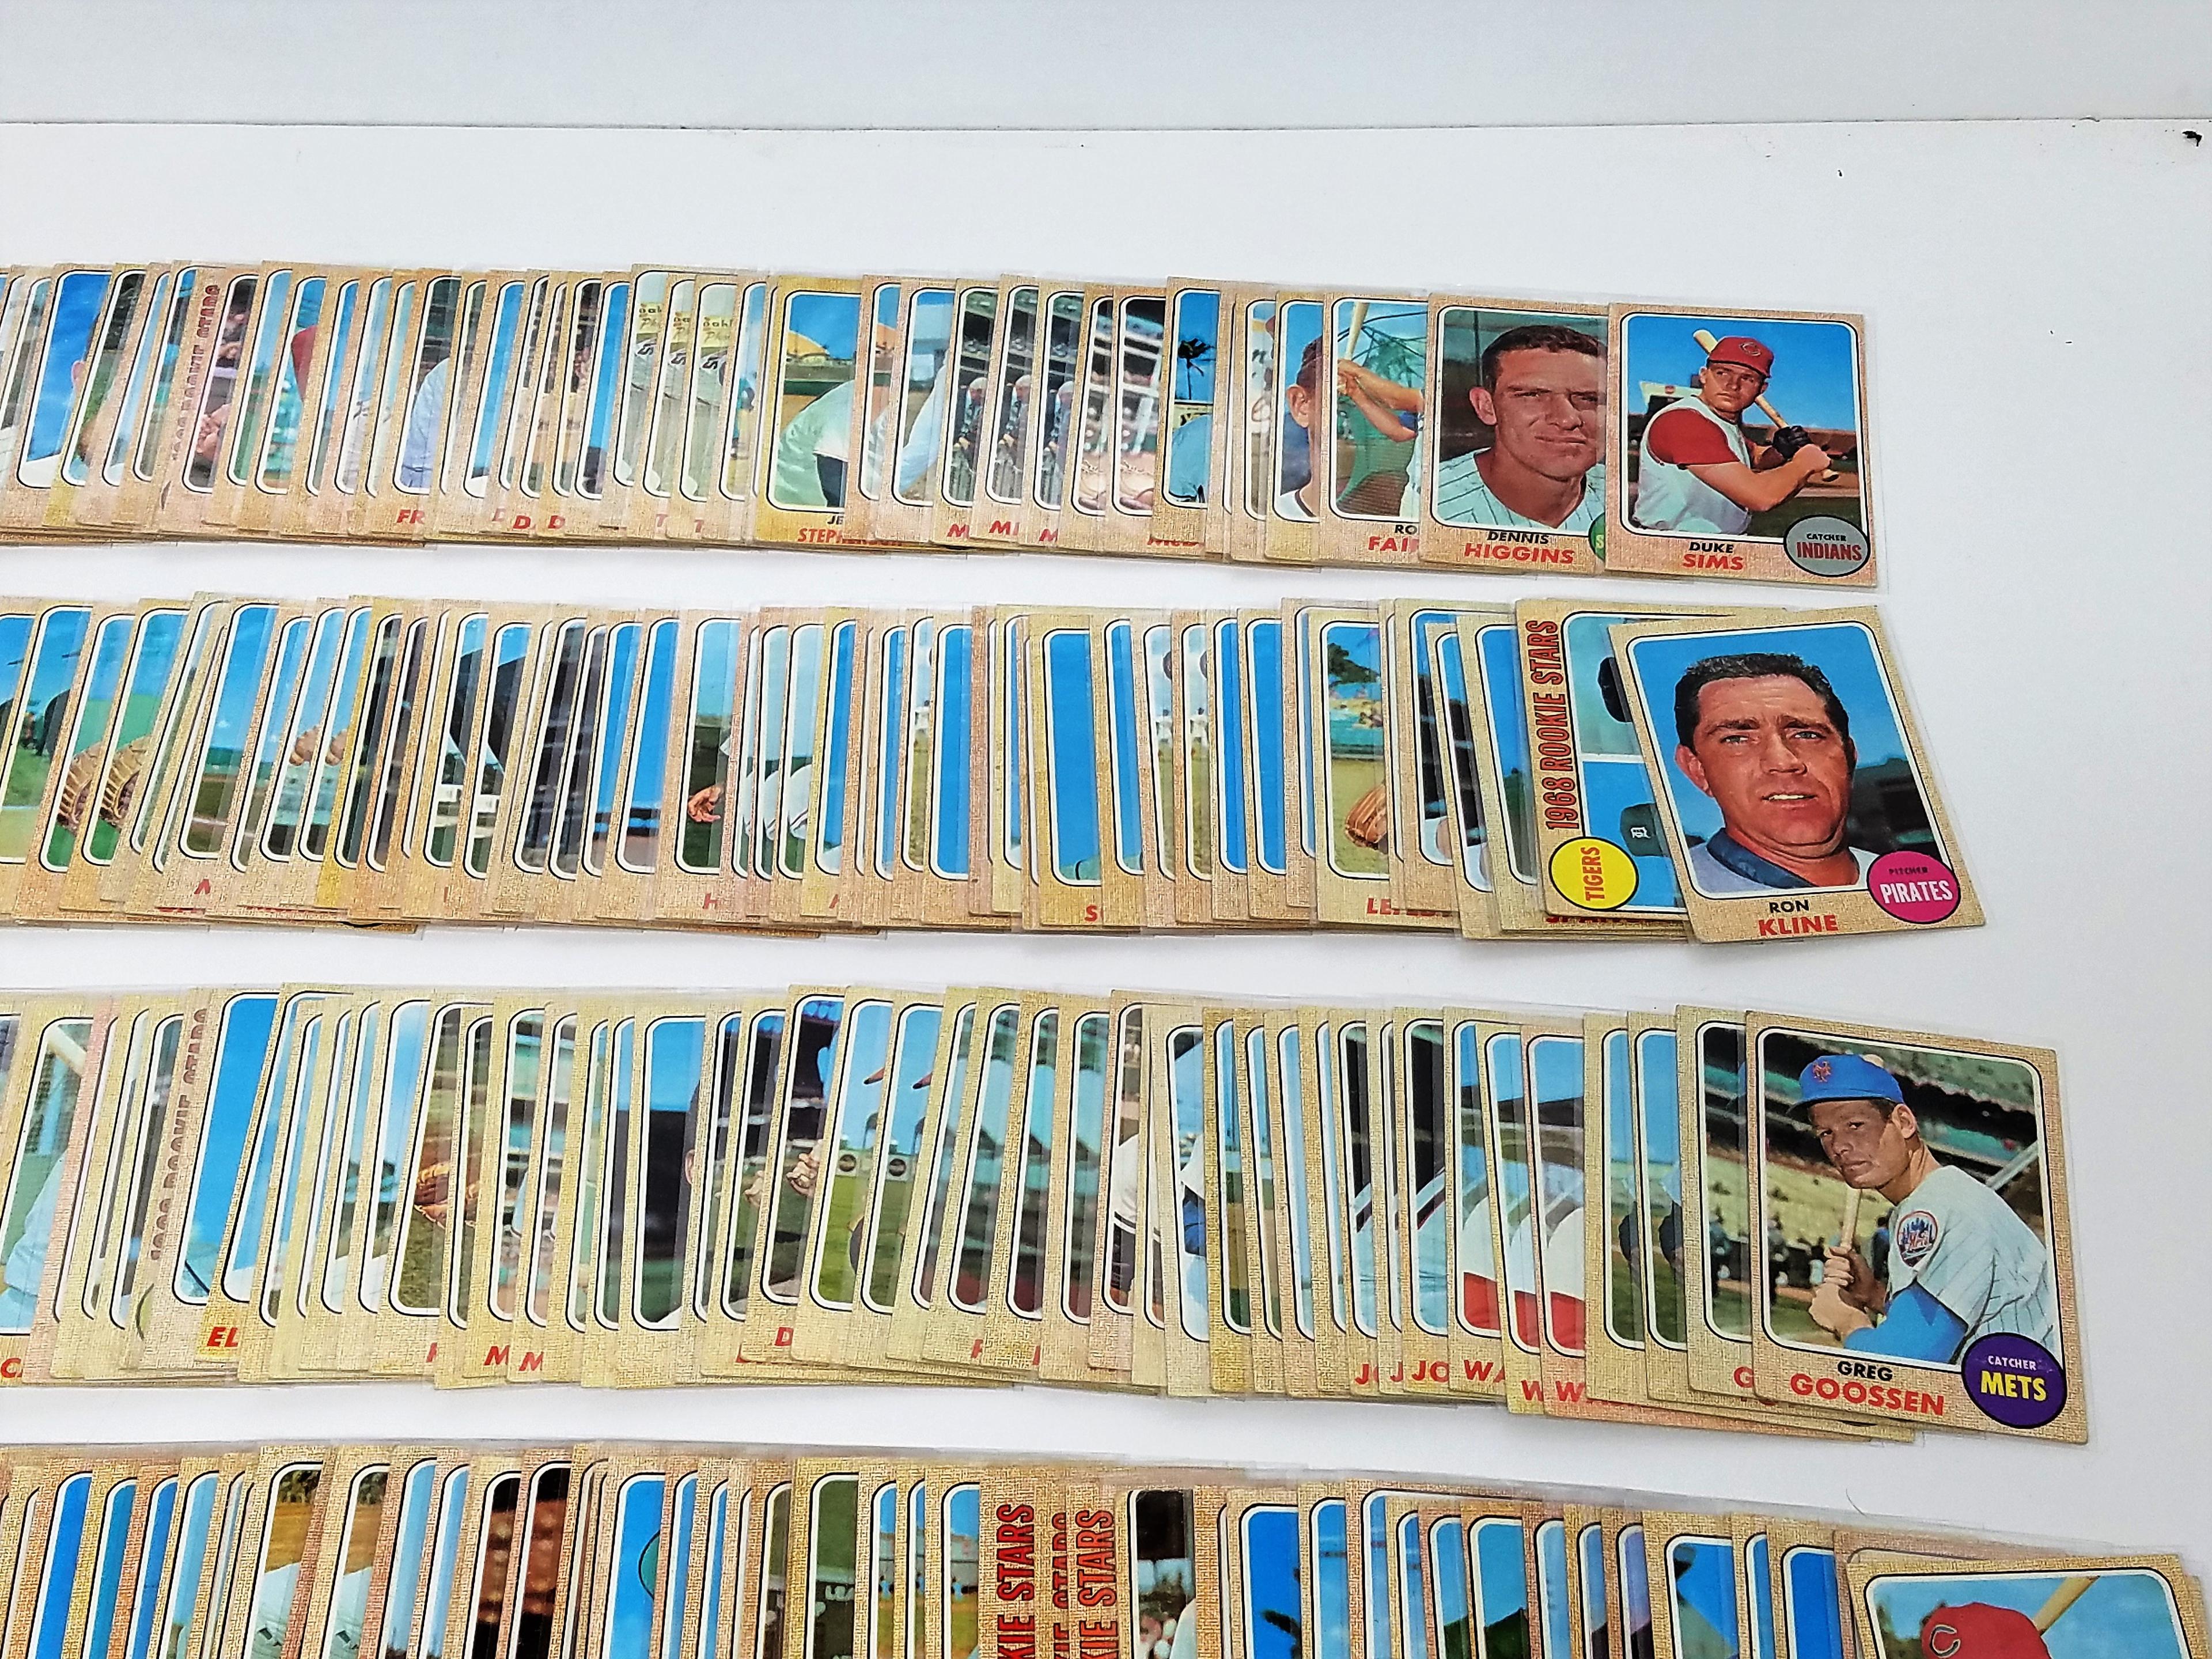 lot of (500)+- 1968 TOPPS baseball cards, some dups, range #115-598, (128 High Series cards) NM to M